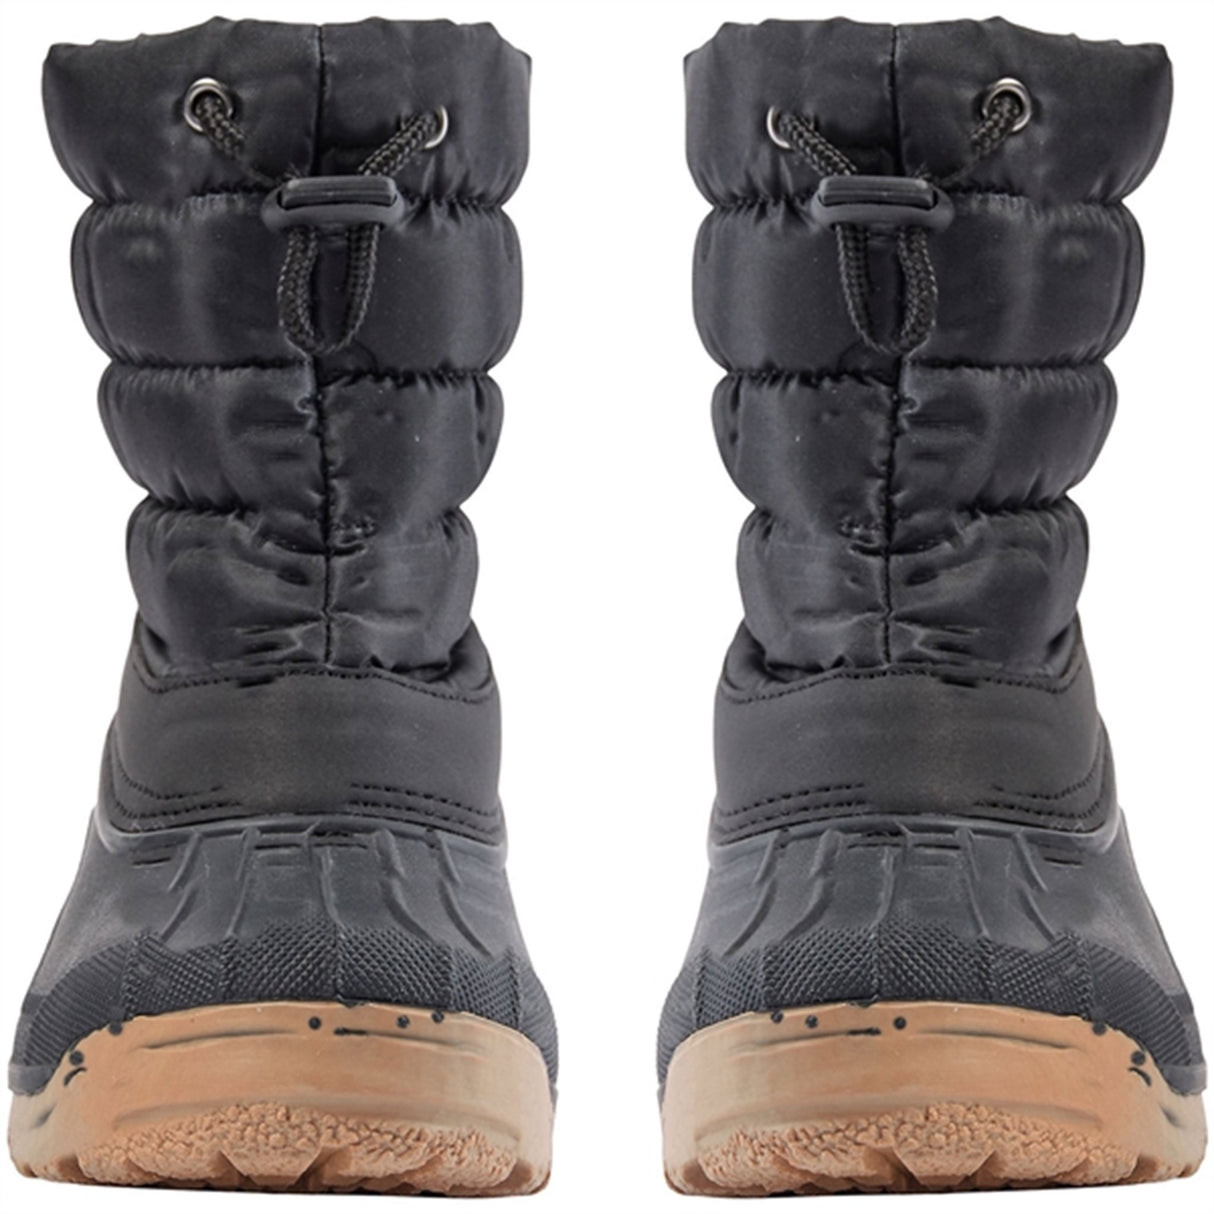 Sofie Schnoor Thermo Boots Black 3